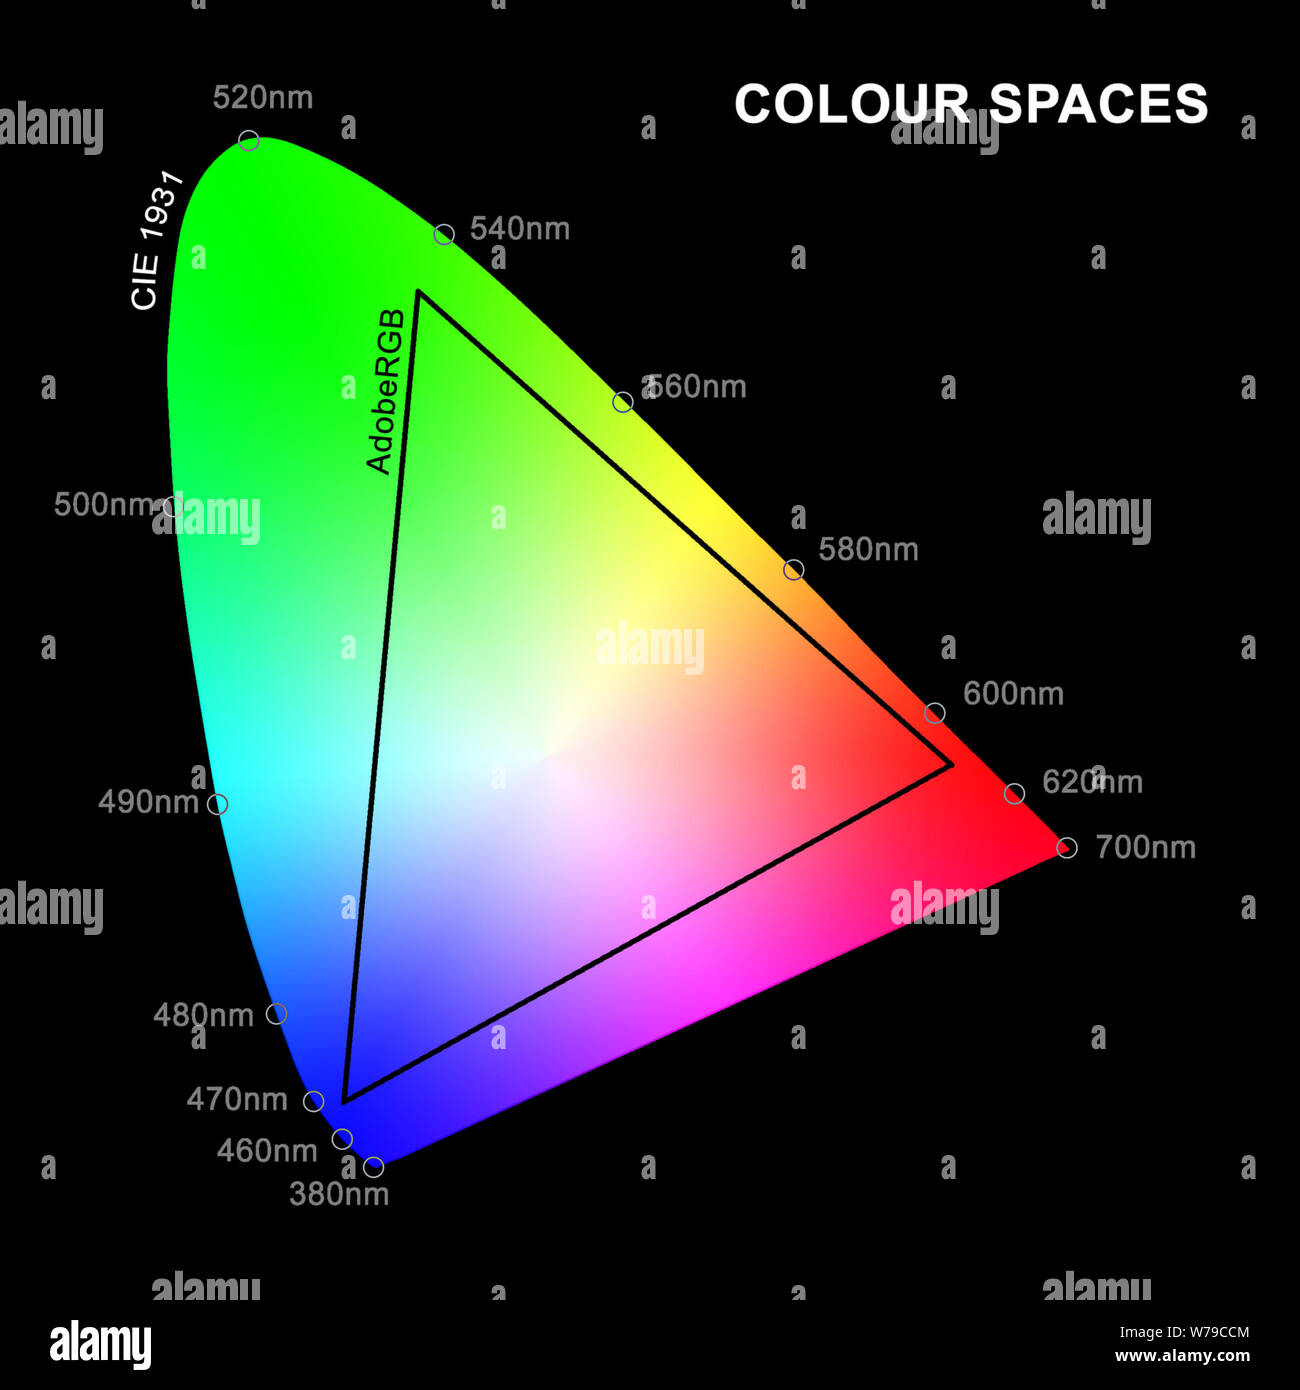 An illustration of AdobeRGB colour space overlaid on CIE 1931 Chromaticity Diagram of human colour perception with wavelengths in nm. Stock Photo